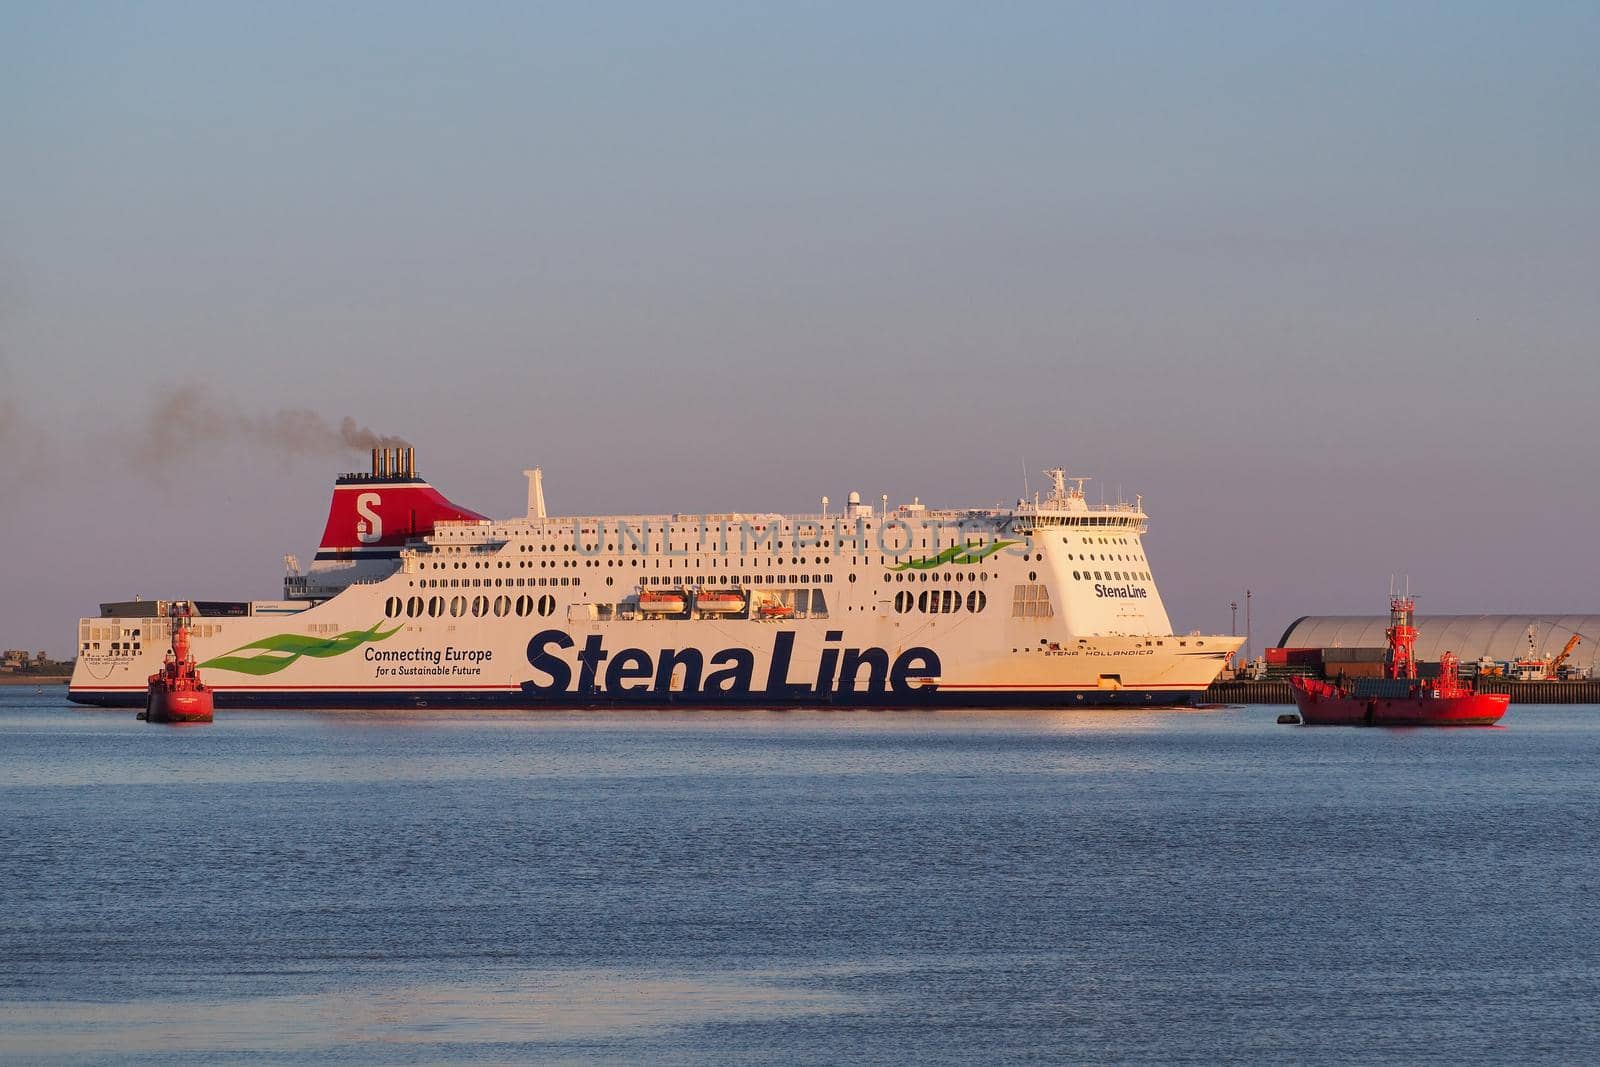 Harwich, Essex, ferry Stena Hollandica passing the dockside and red lightships by PhilHarland